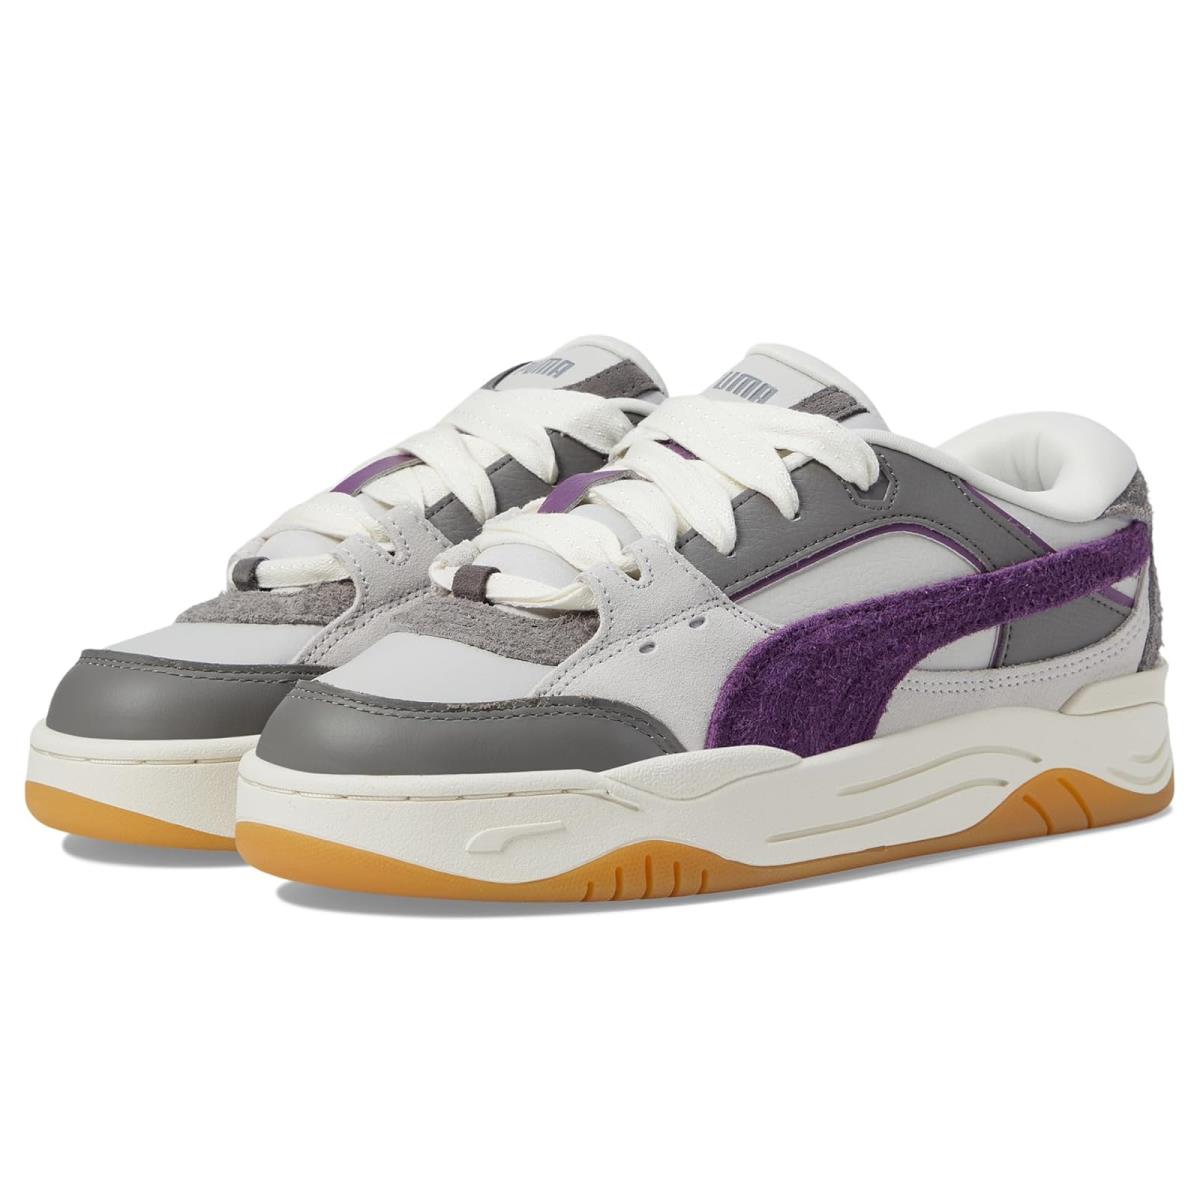 Woman`s Sneakers Athletic Shoes Puma 180 Prime Crushed Berry/Warm White